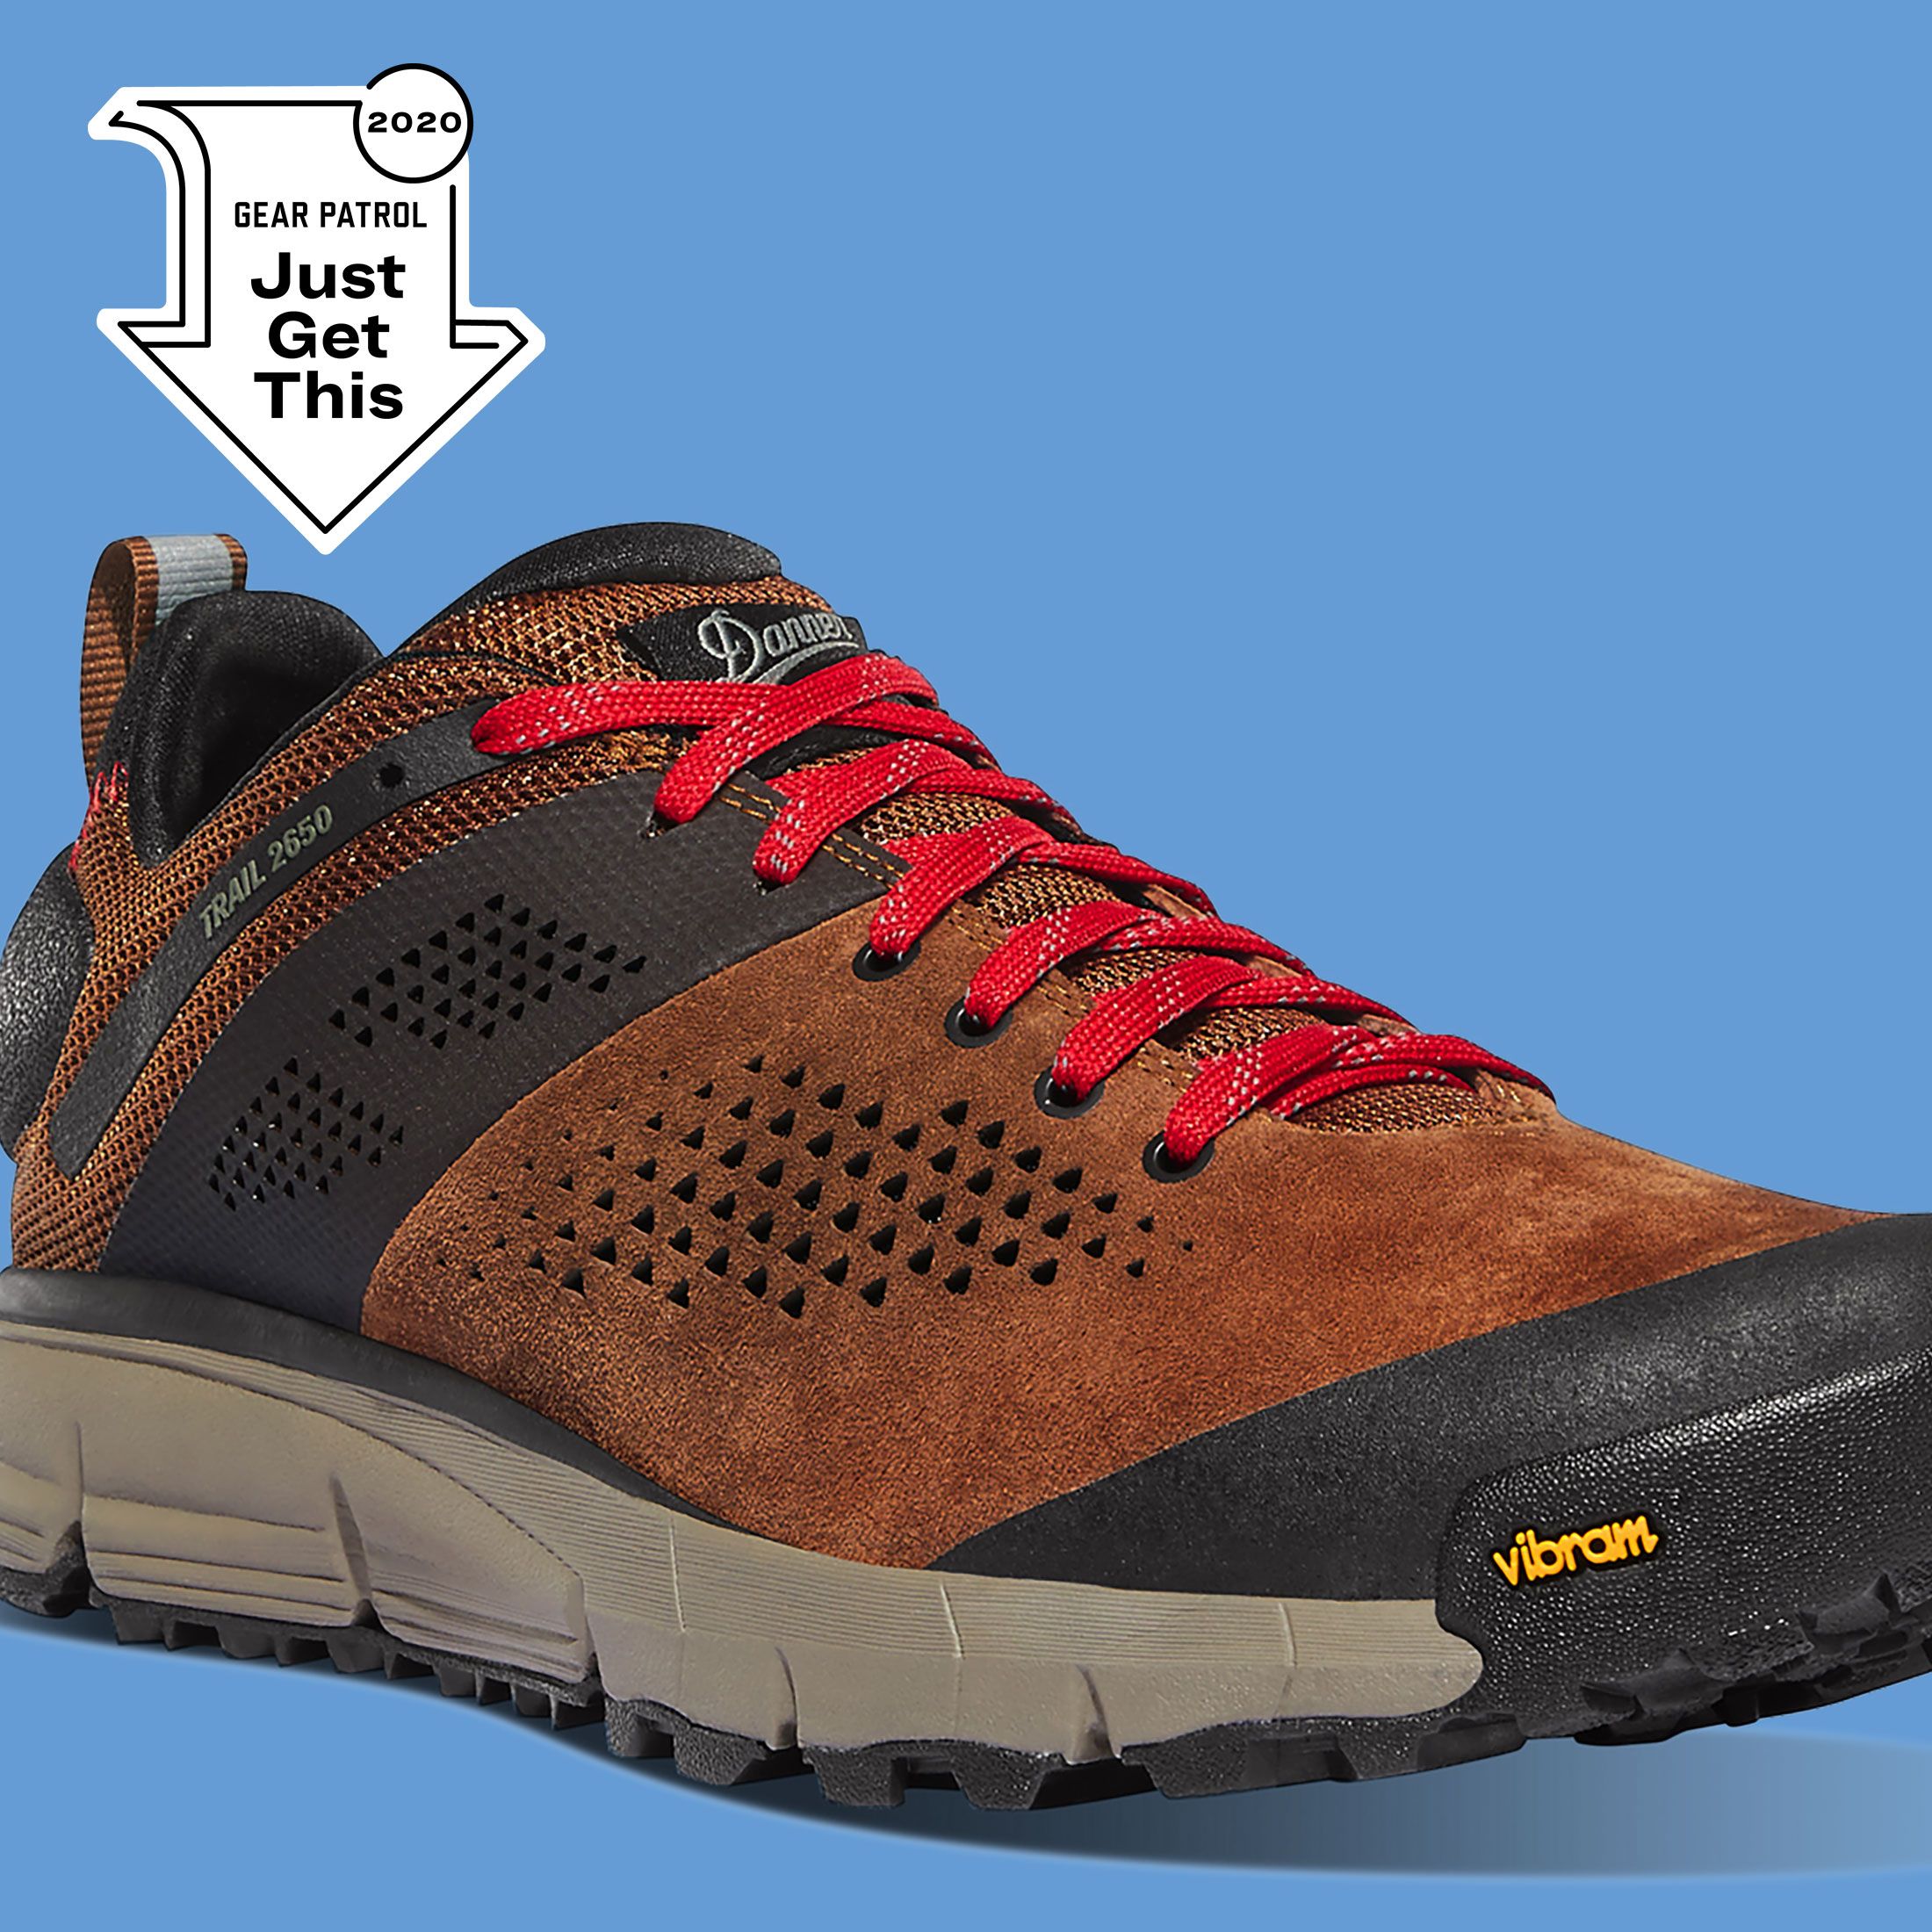 Need an Everyday Hiking Shoe? Just Get This